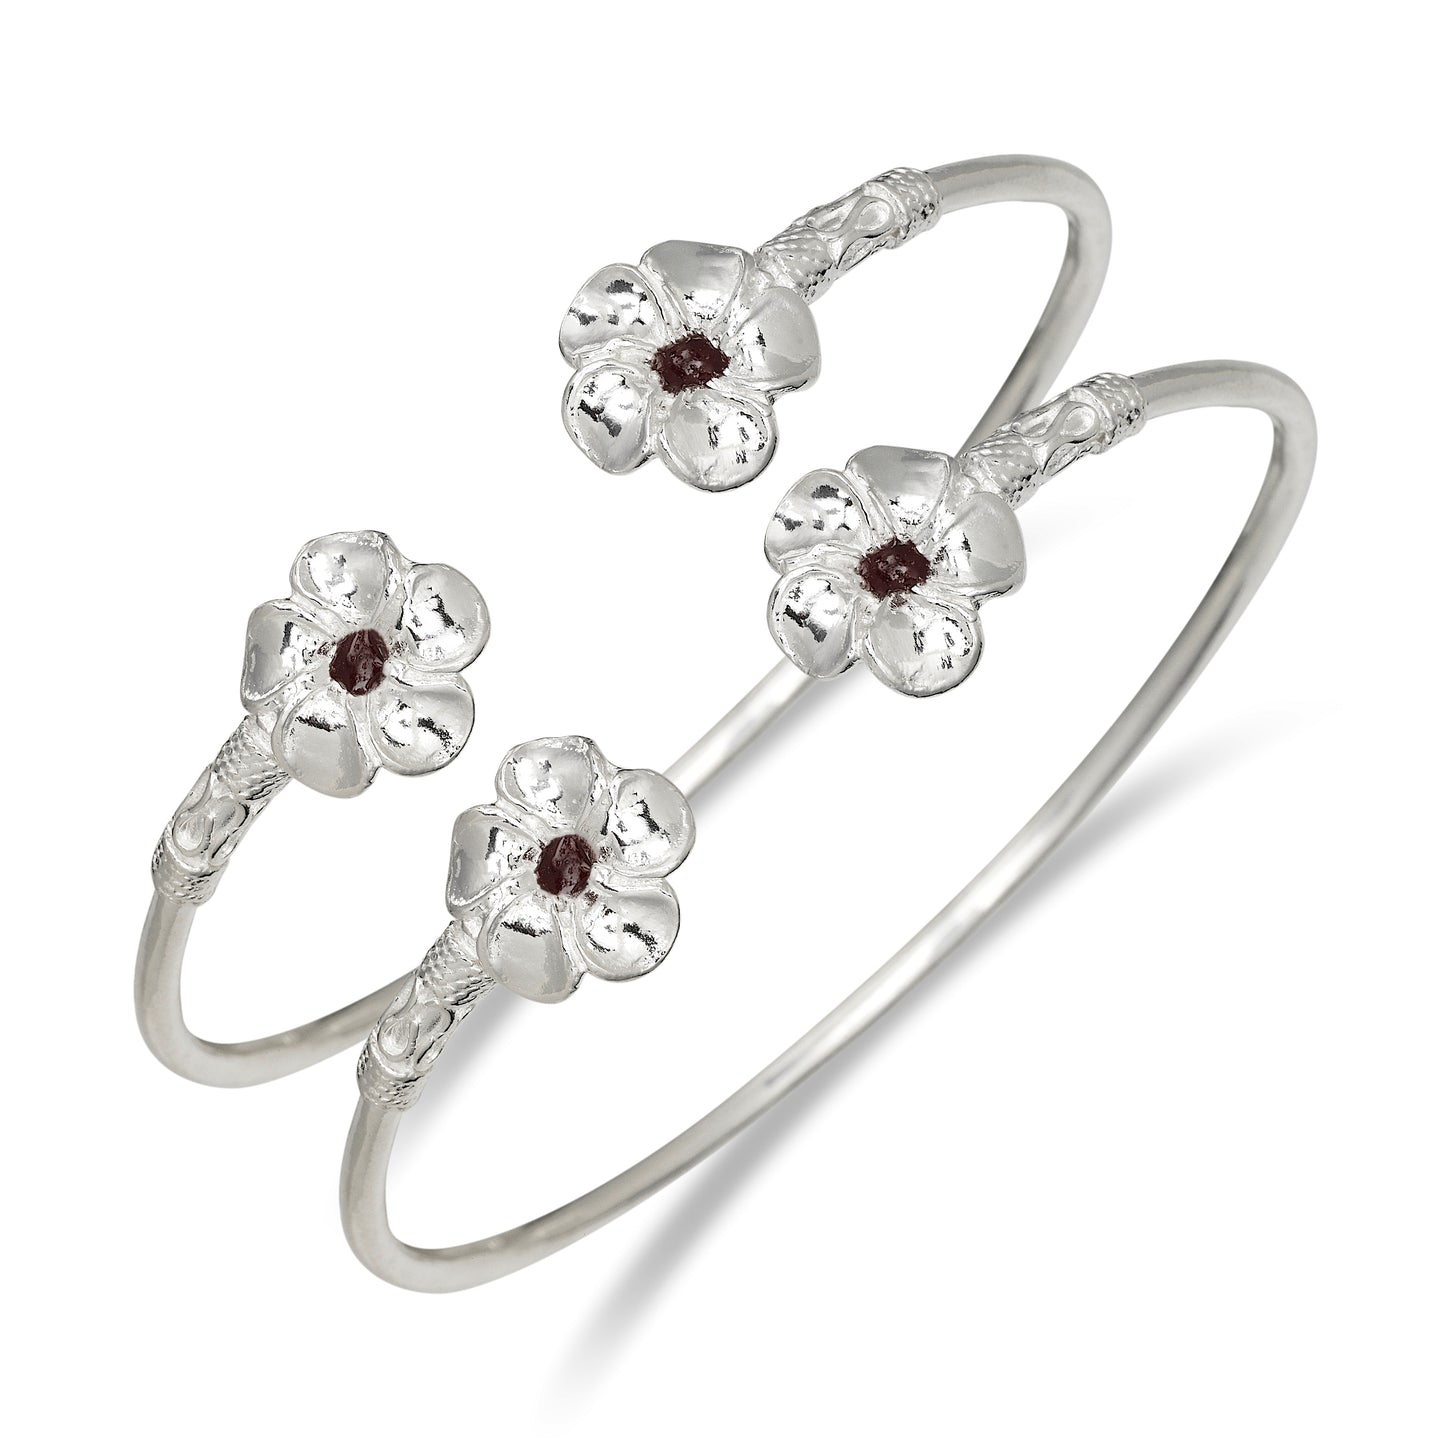 NEW! Better Jewelry Flower .925 Sterling Silver West Indian Bangles with Enamel dots, 1 pair